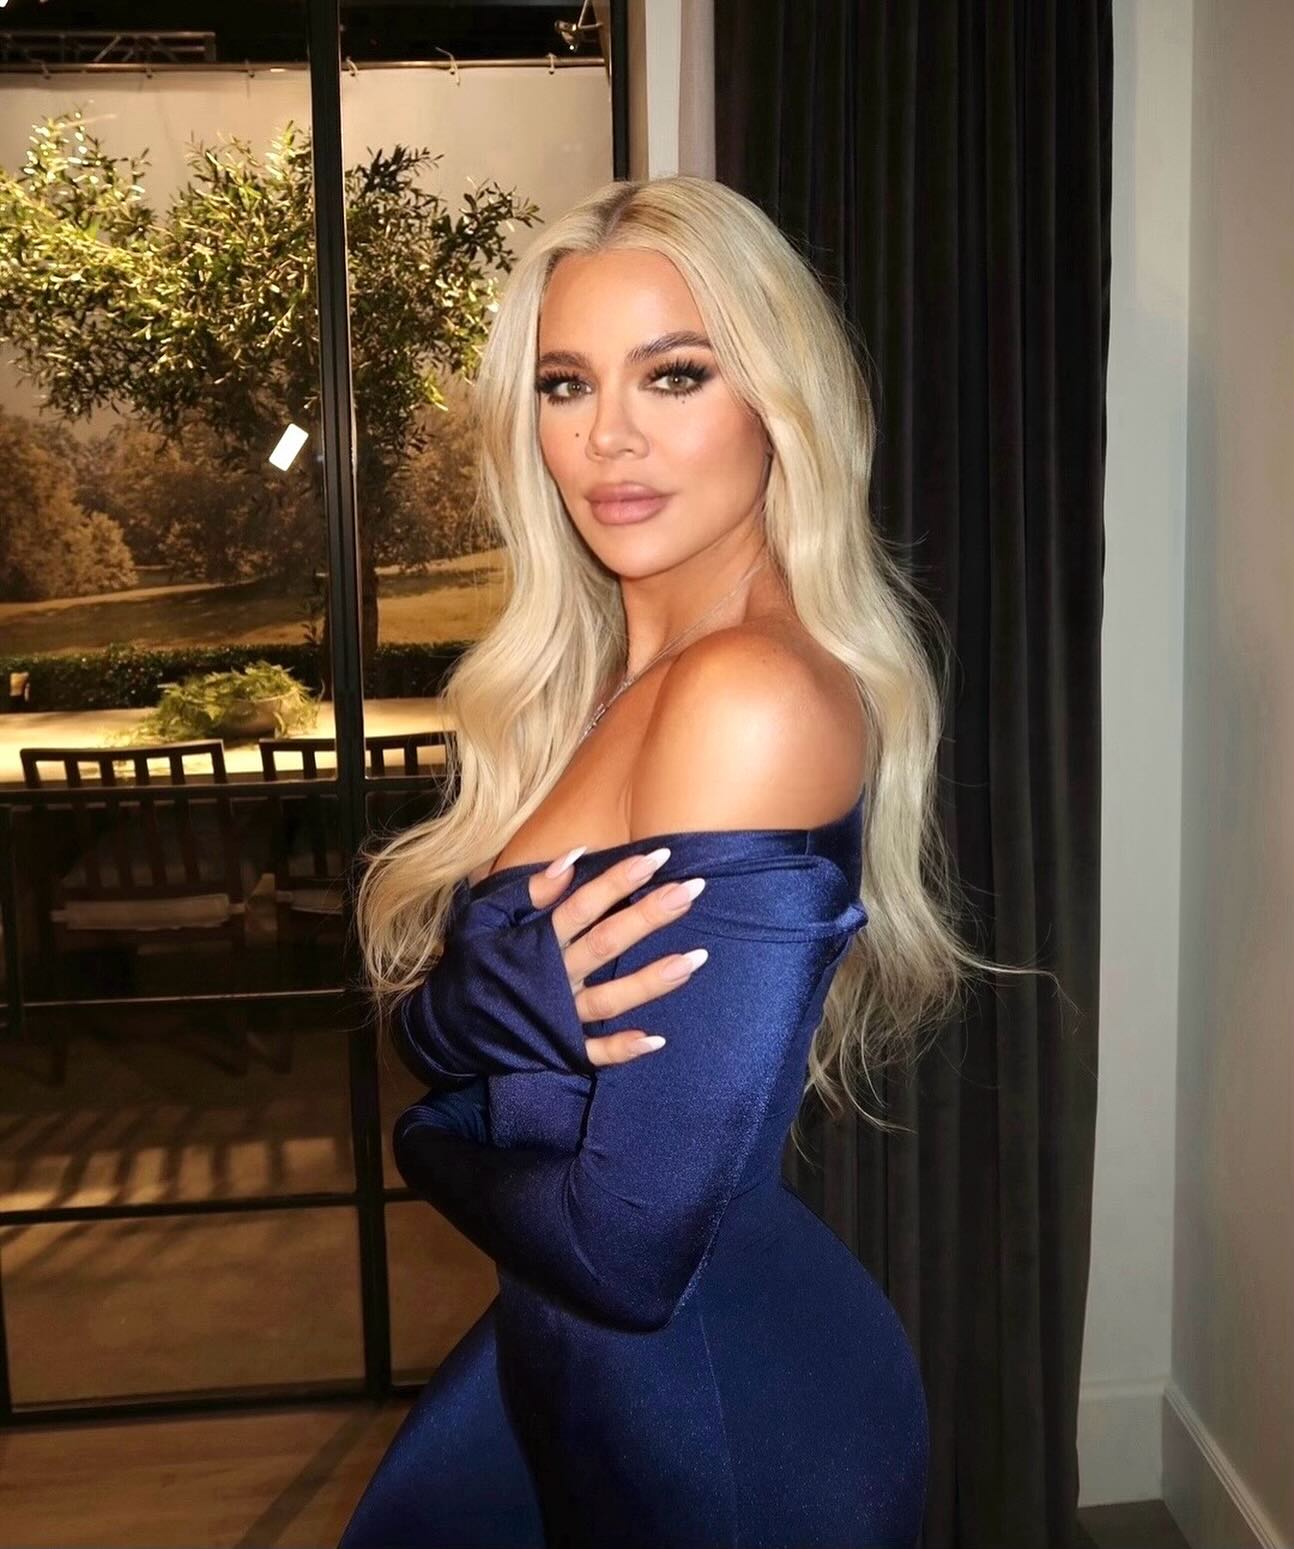 Khloe revealed that her hair is no longer the platinum blonde fans are used to